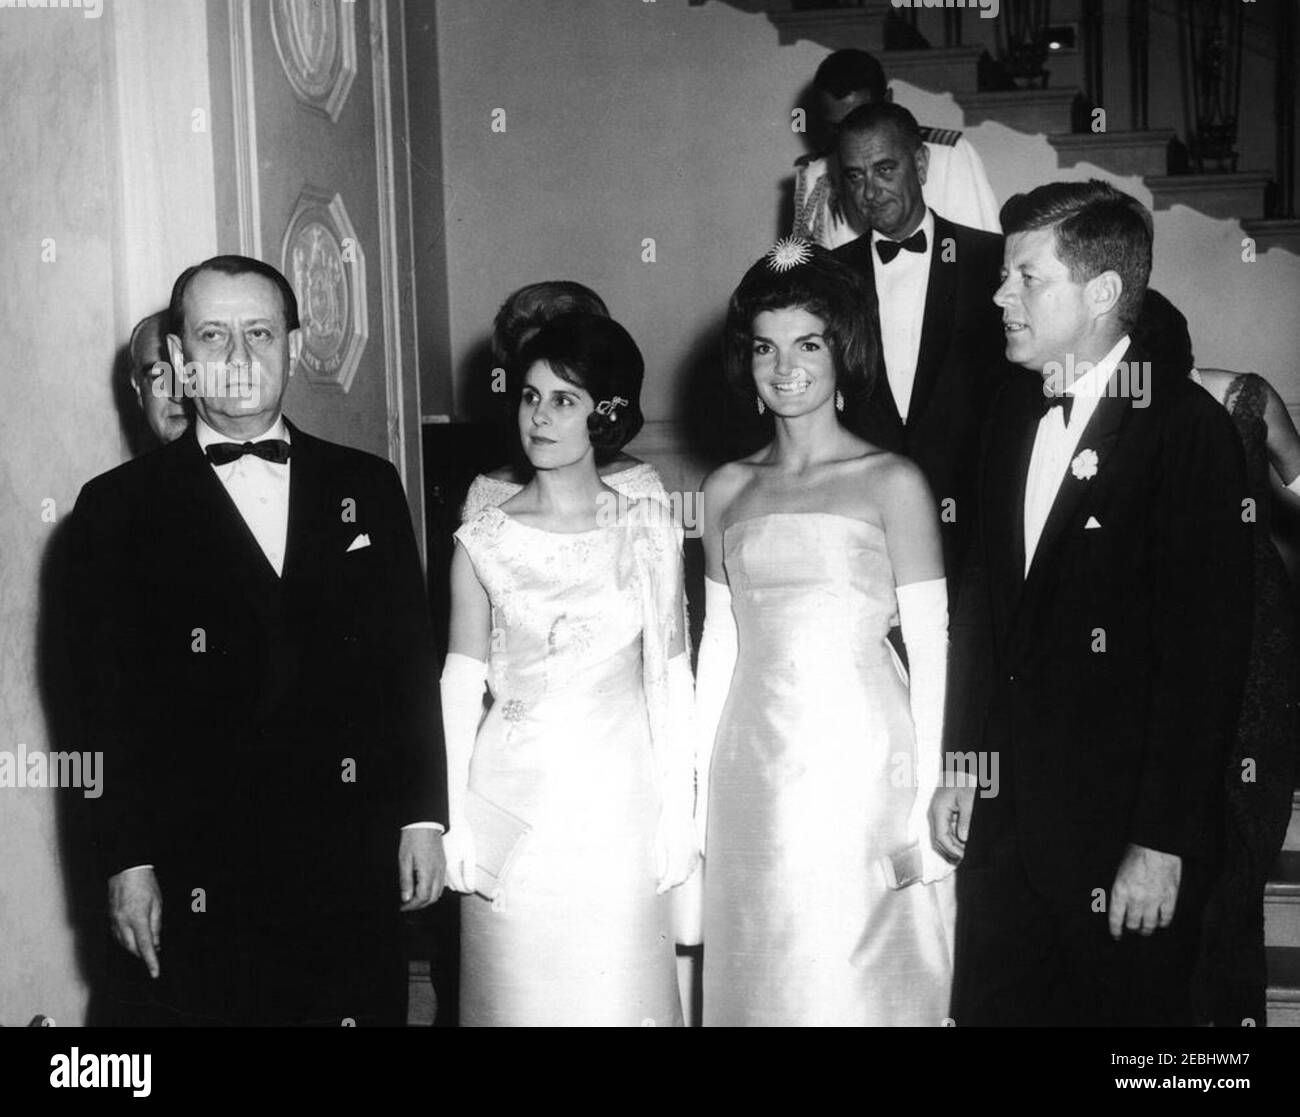 Dinner in honor of Andru00e9 Malraux, Minister of State for Cultural Affairs of France, 8:00PM. President John F. Kennedy and others arrive at a dinner in honor of Minister of State for Cultural Affairs of France, Andru00e9 Malraux. Front row (L-R): Minister Malraux; wife of the minister, pianist Madeleine Malraux; First Lady Jacqueline Kennedy; President Kennedy. Back rows (L-R): French Ambassador to the United States, Hervu00e9 Alphand (behind Minister Malraux); wife of the ambassador, Nicole Alphand (mostly hidden); Vice President Lyndon B. Johnson; Naval Aide to the President, Captain T Stock Photo